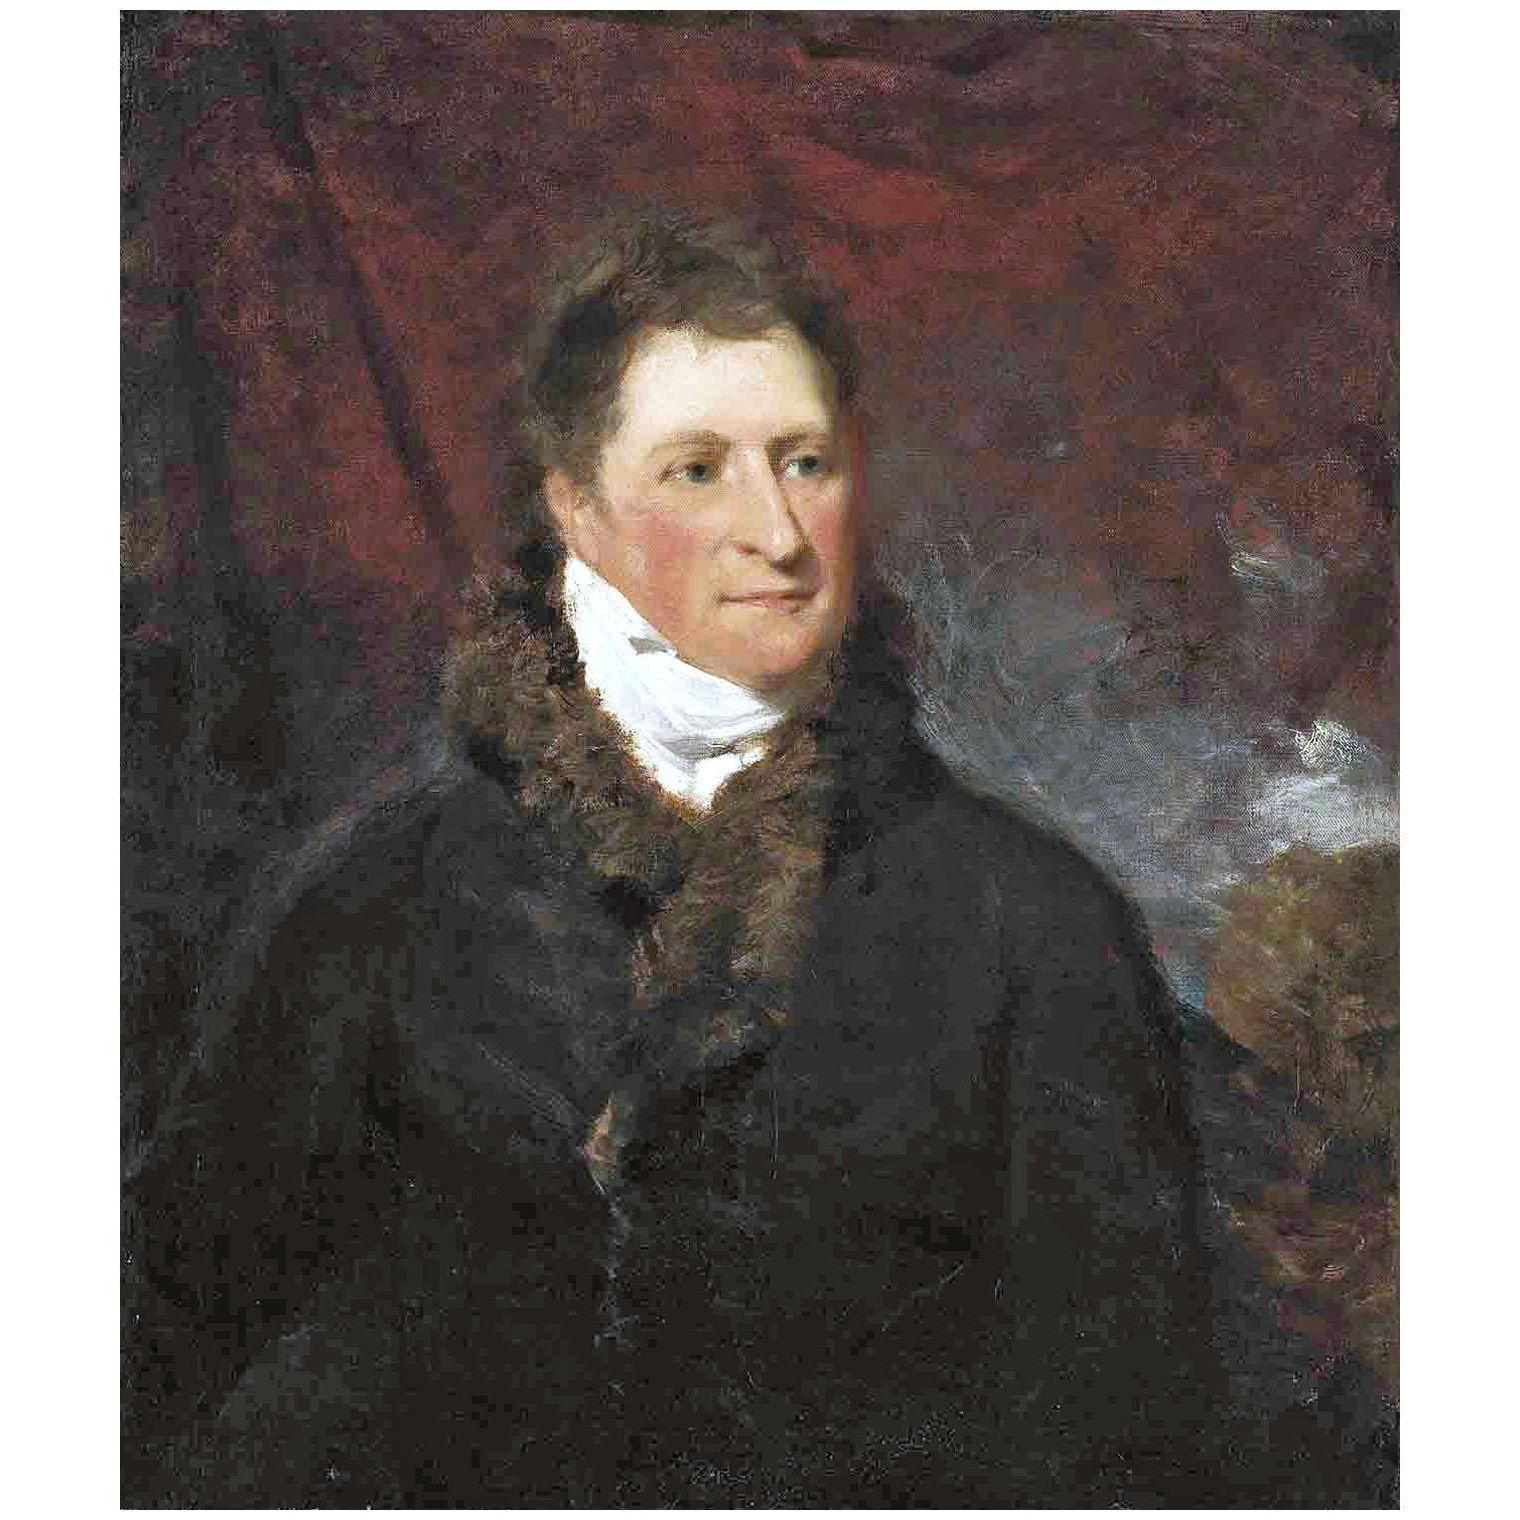 John Constable. Henry Griswold Lewis. 1809. Somerville College Oxford